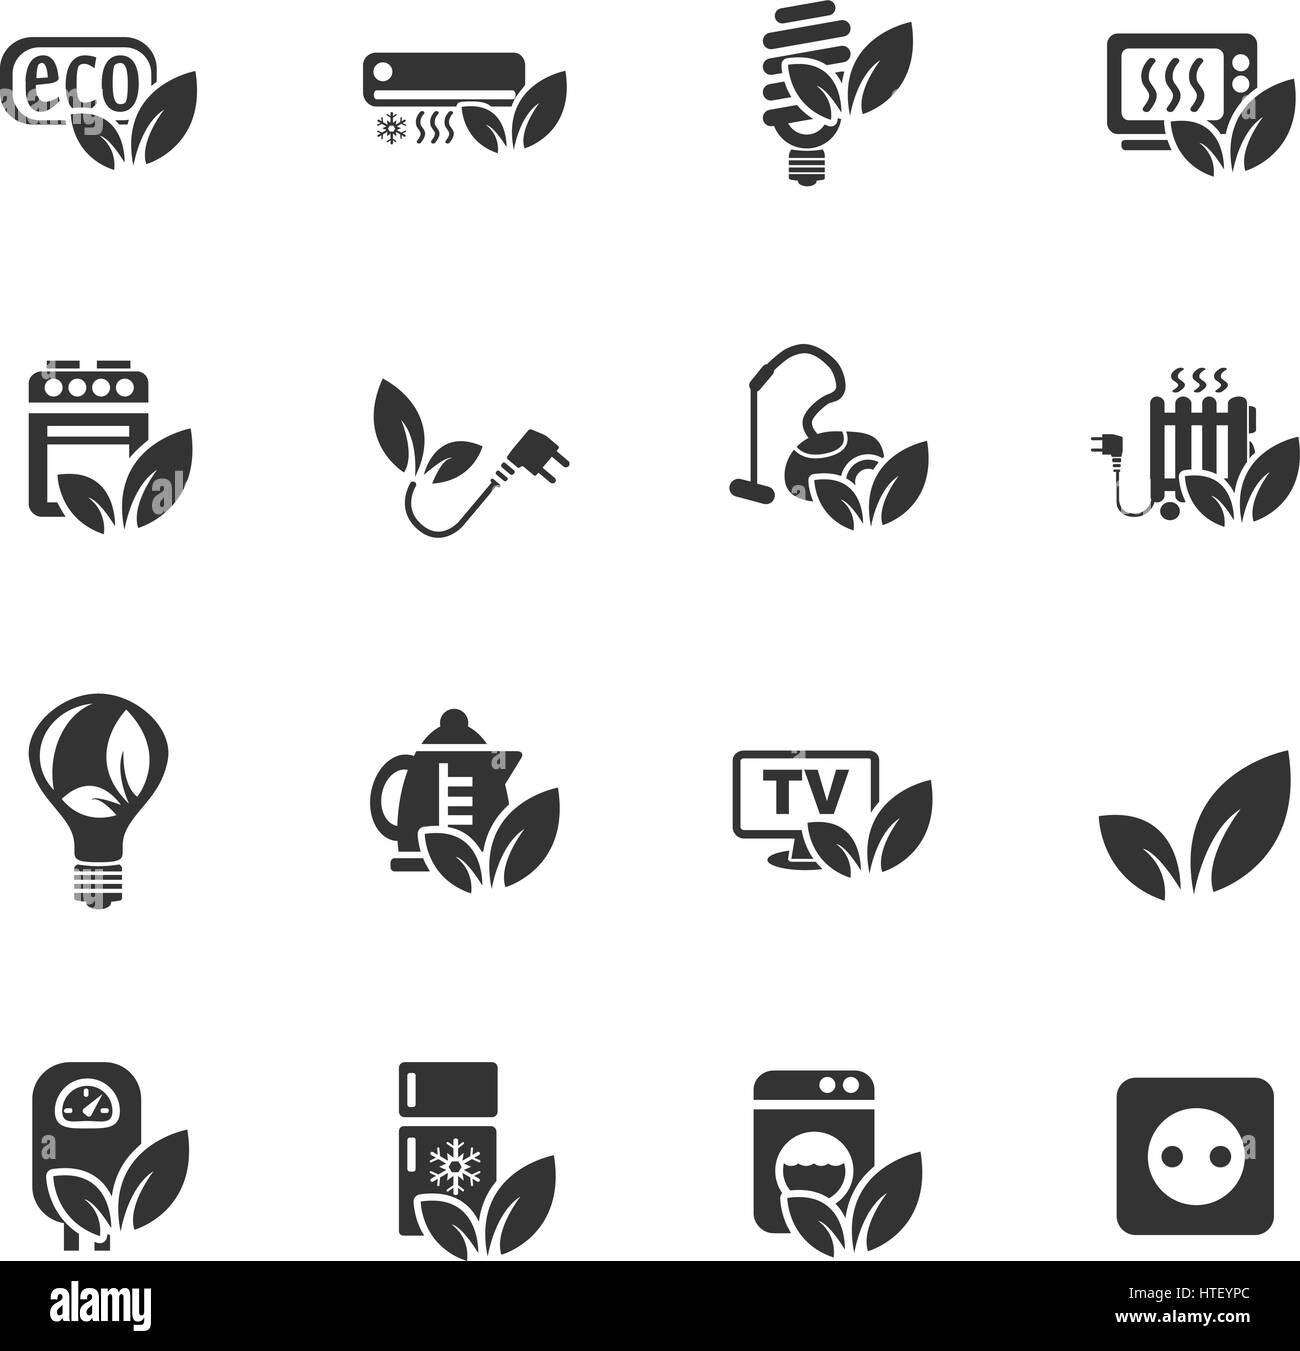 eco web icons for user interface design Stock Vector